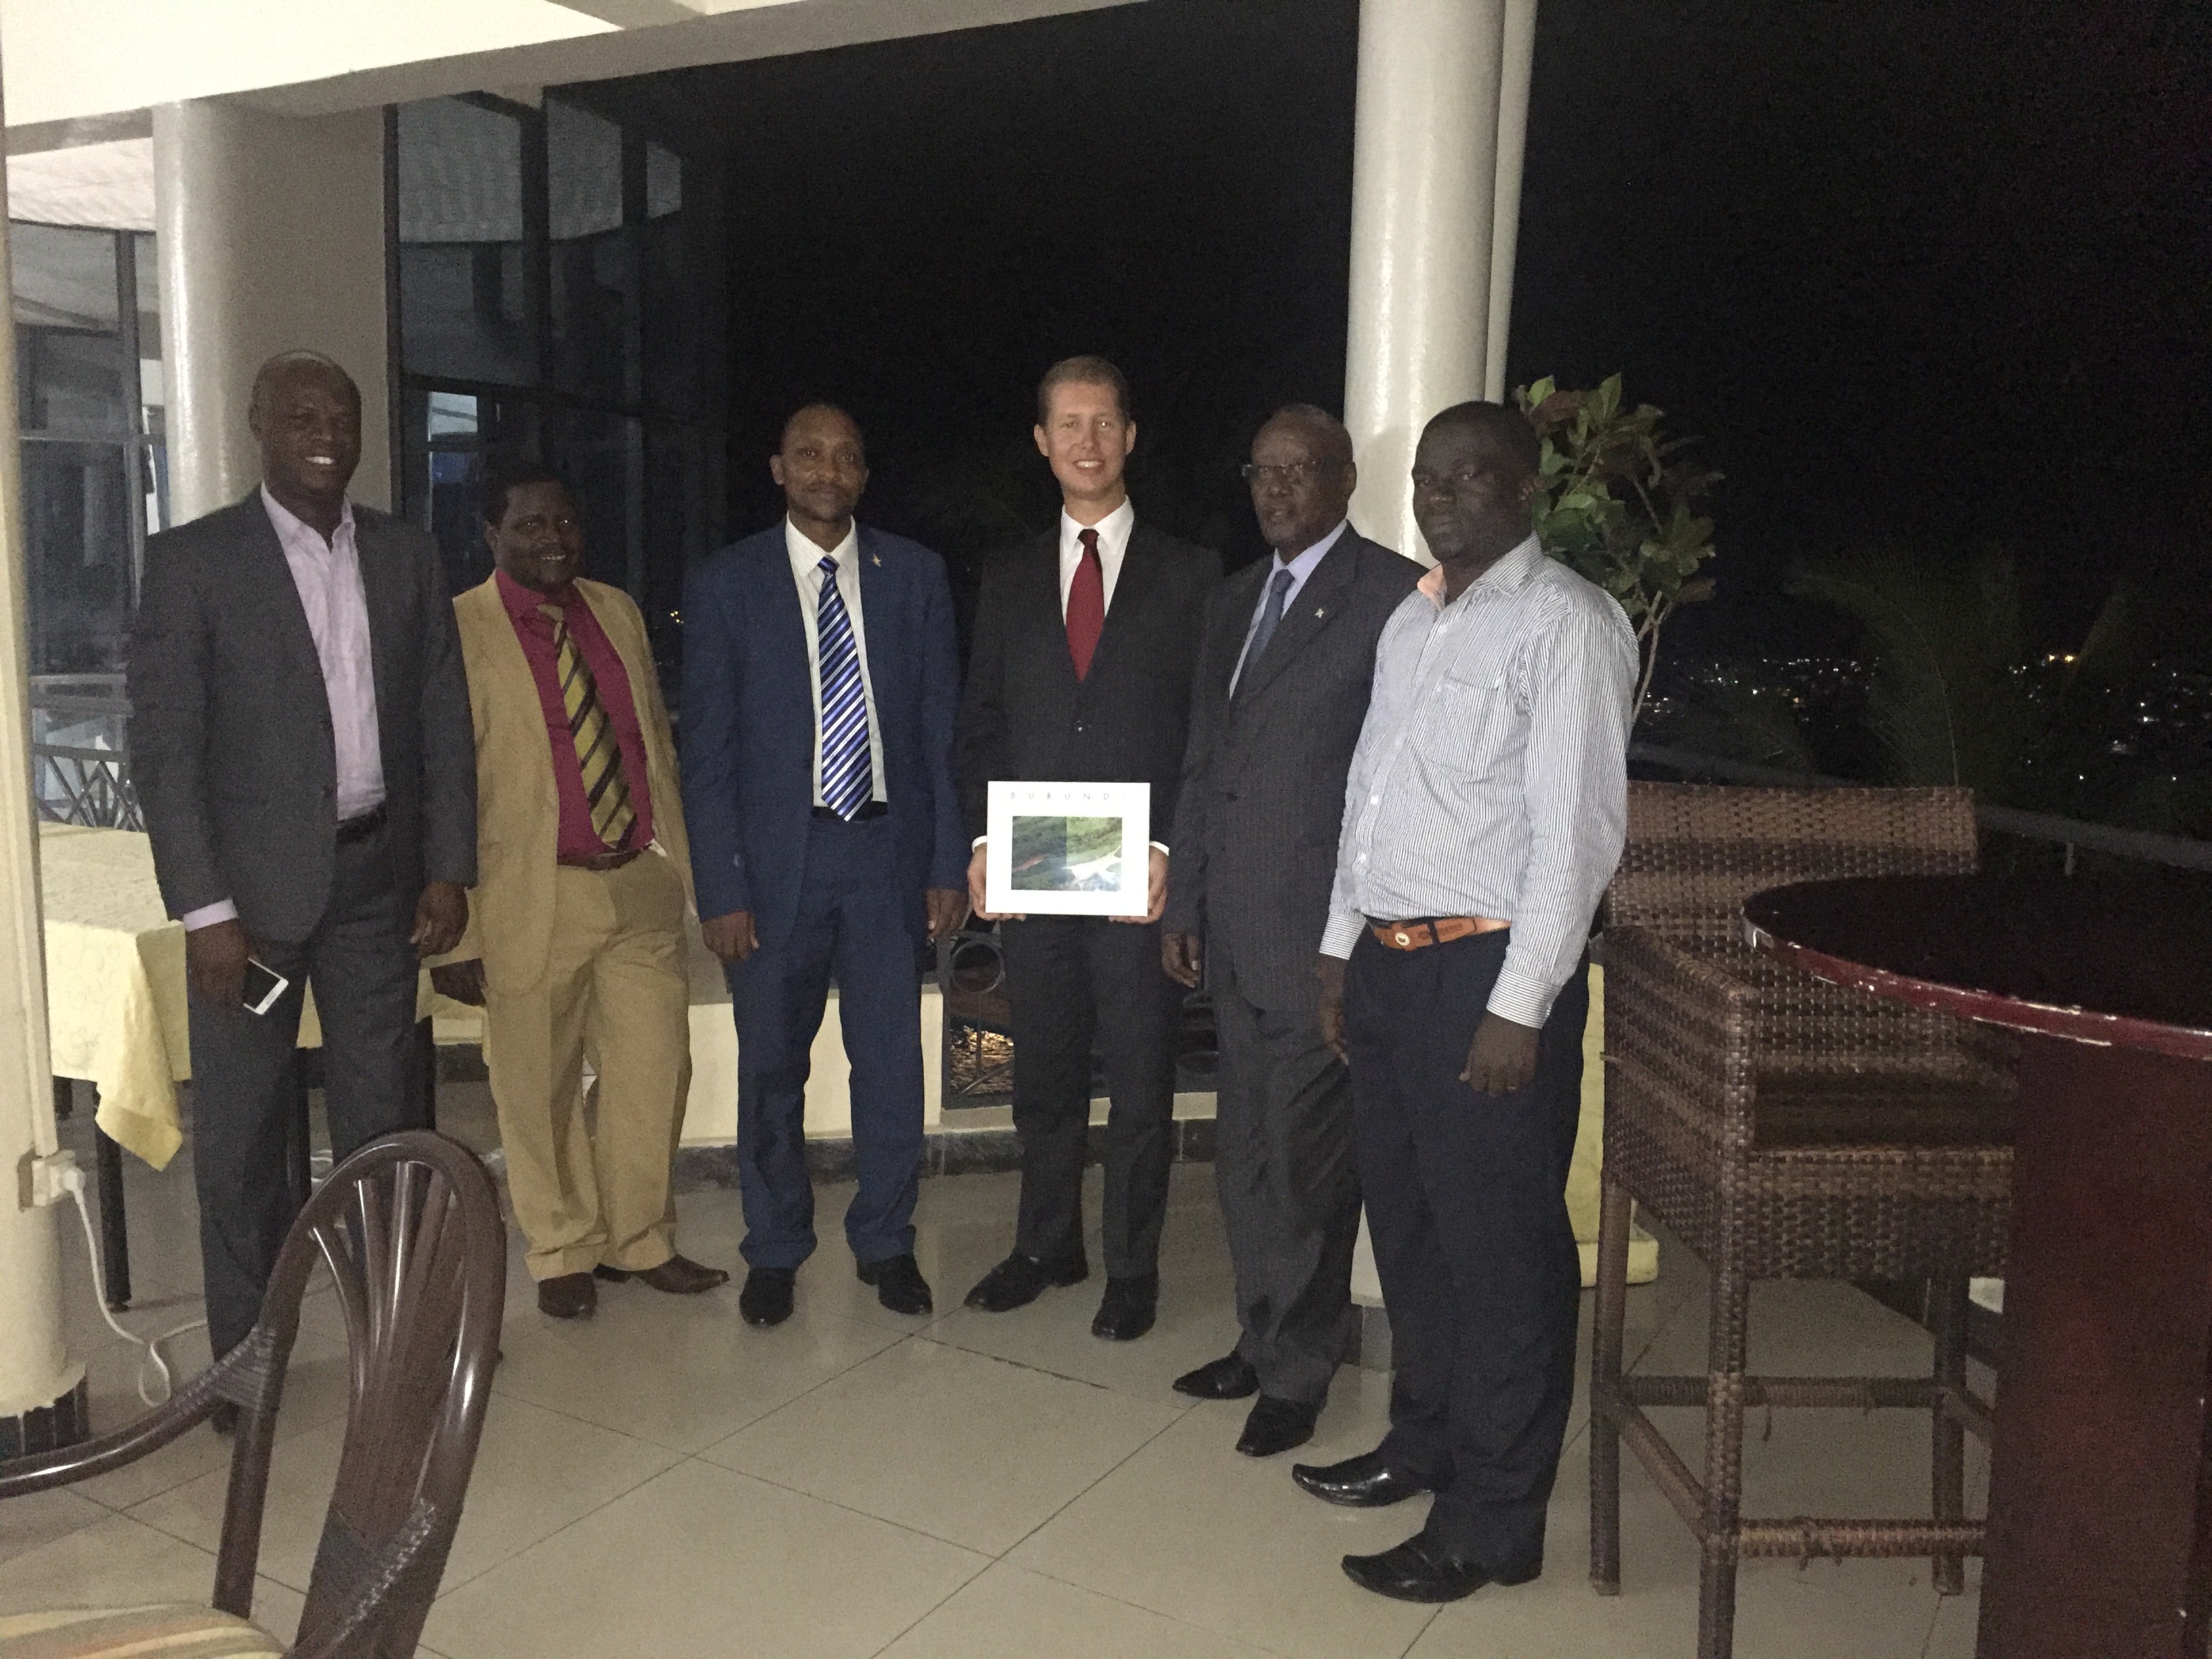 Meeting with the Burundi Investment Promotion Authority